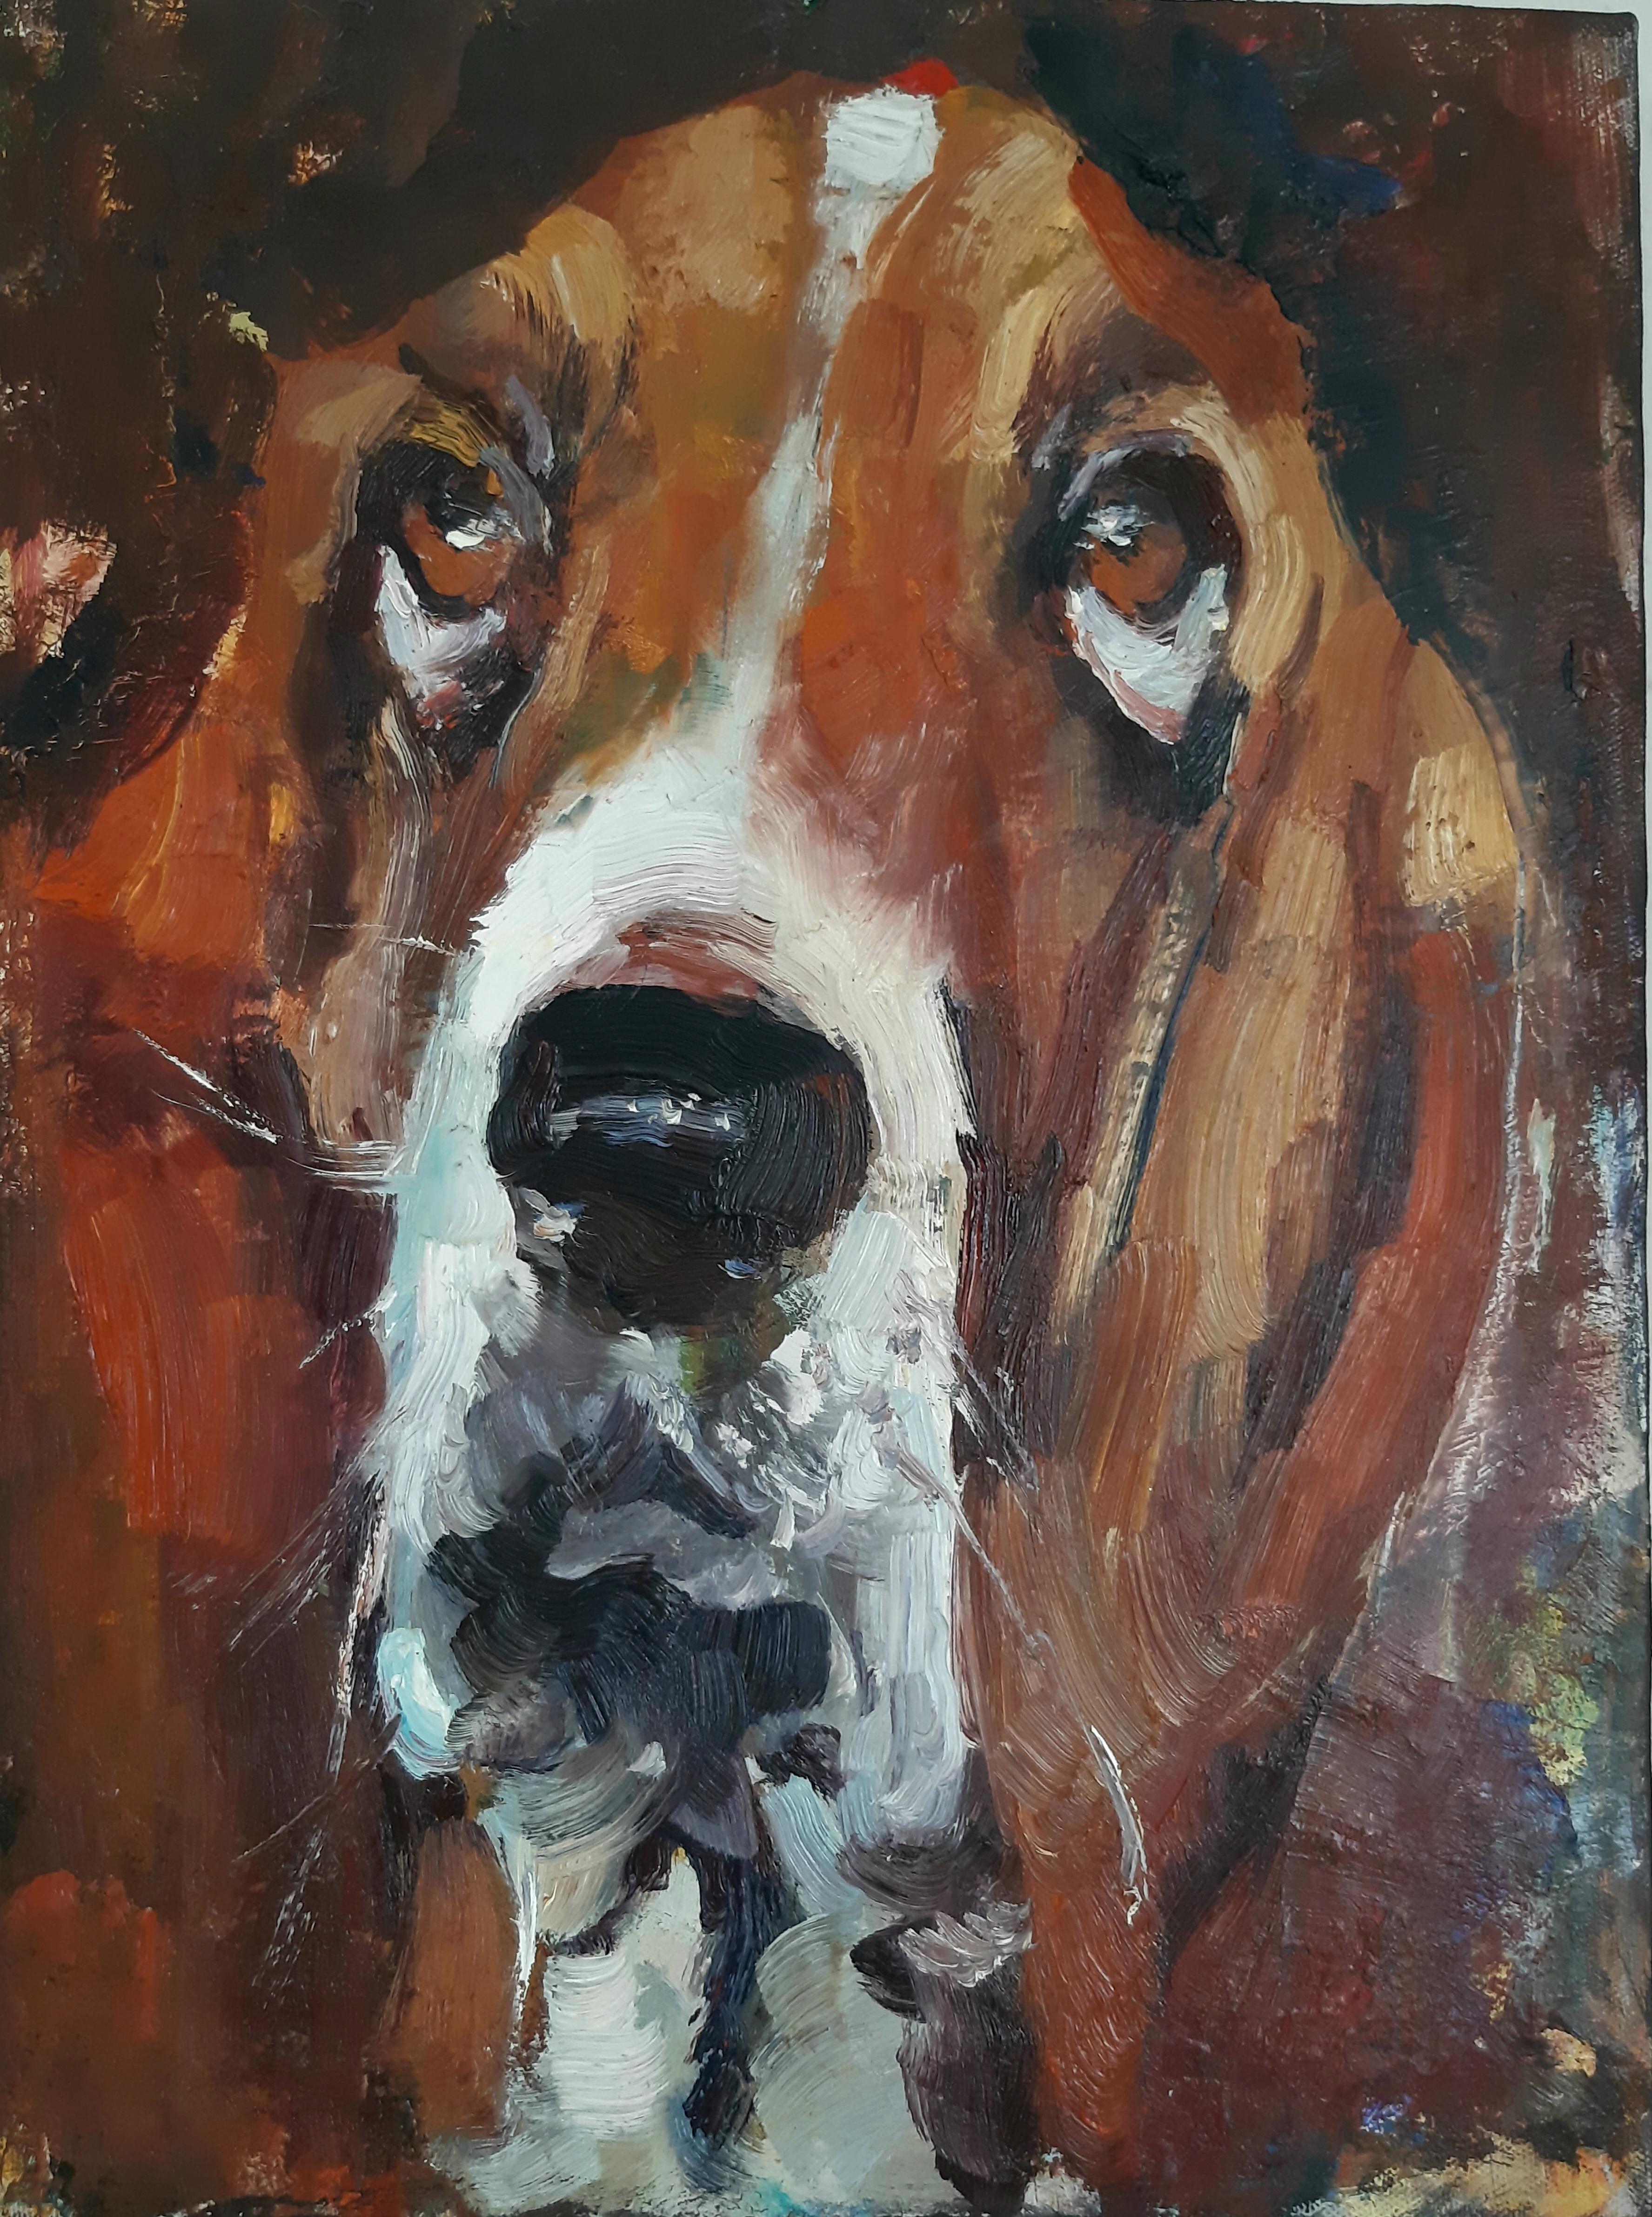 Max Skoblinsky Animal Painting - "Enchantment of the Gaze: Portrait of a Basset Hound Reflecting Inner Emotions"